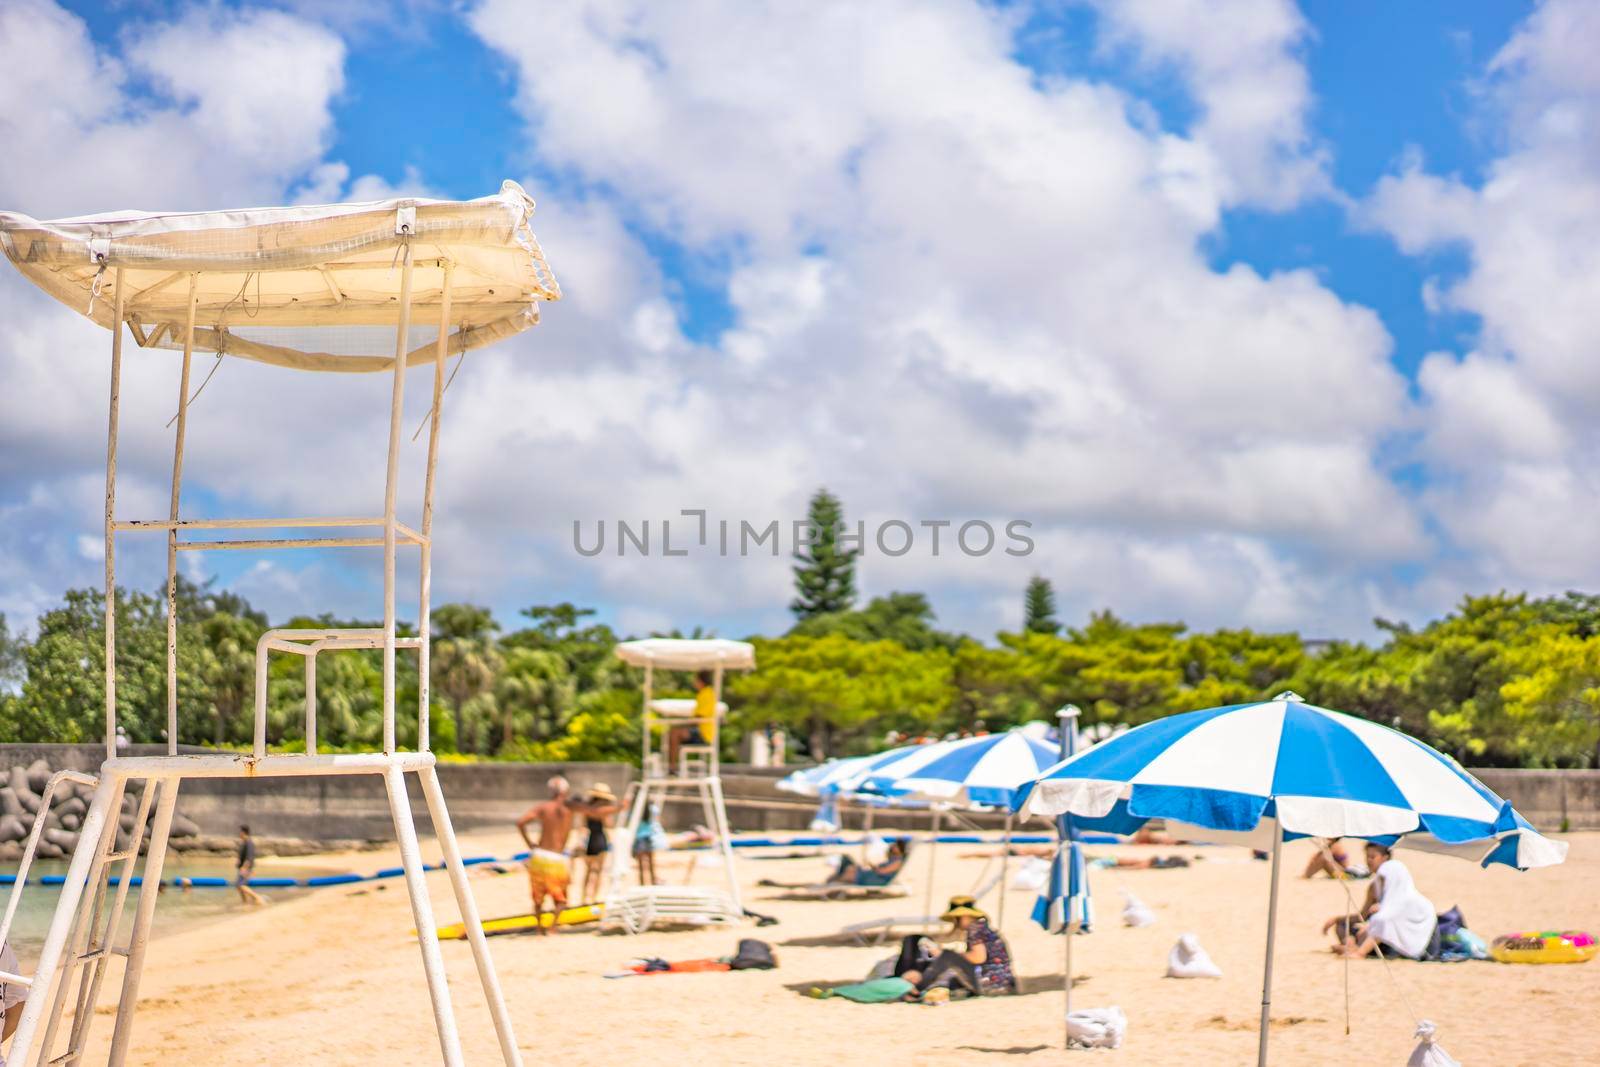 okinawa, japan - september 15 2019: Beach umbrellas and Lifeguard chairs on the sandy beach Naminoue in Naha City in Okinawa Prefecture, Japan.